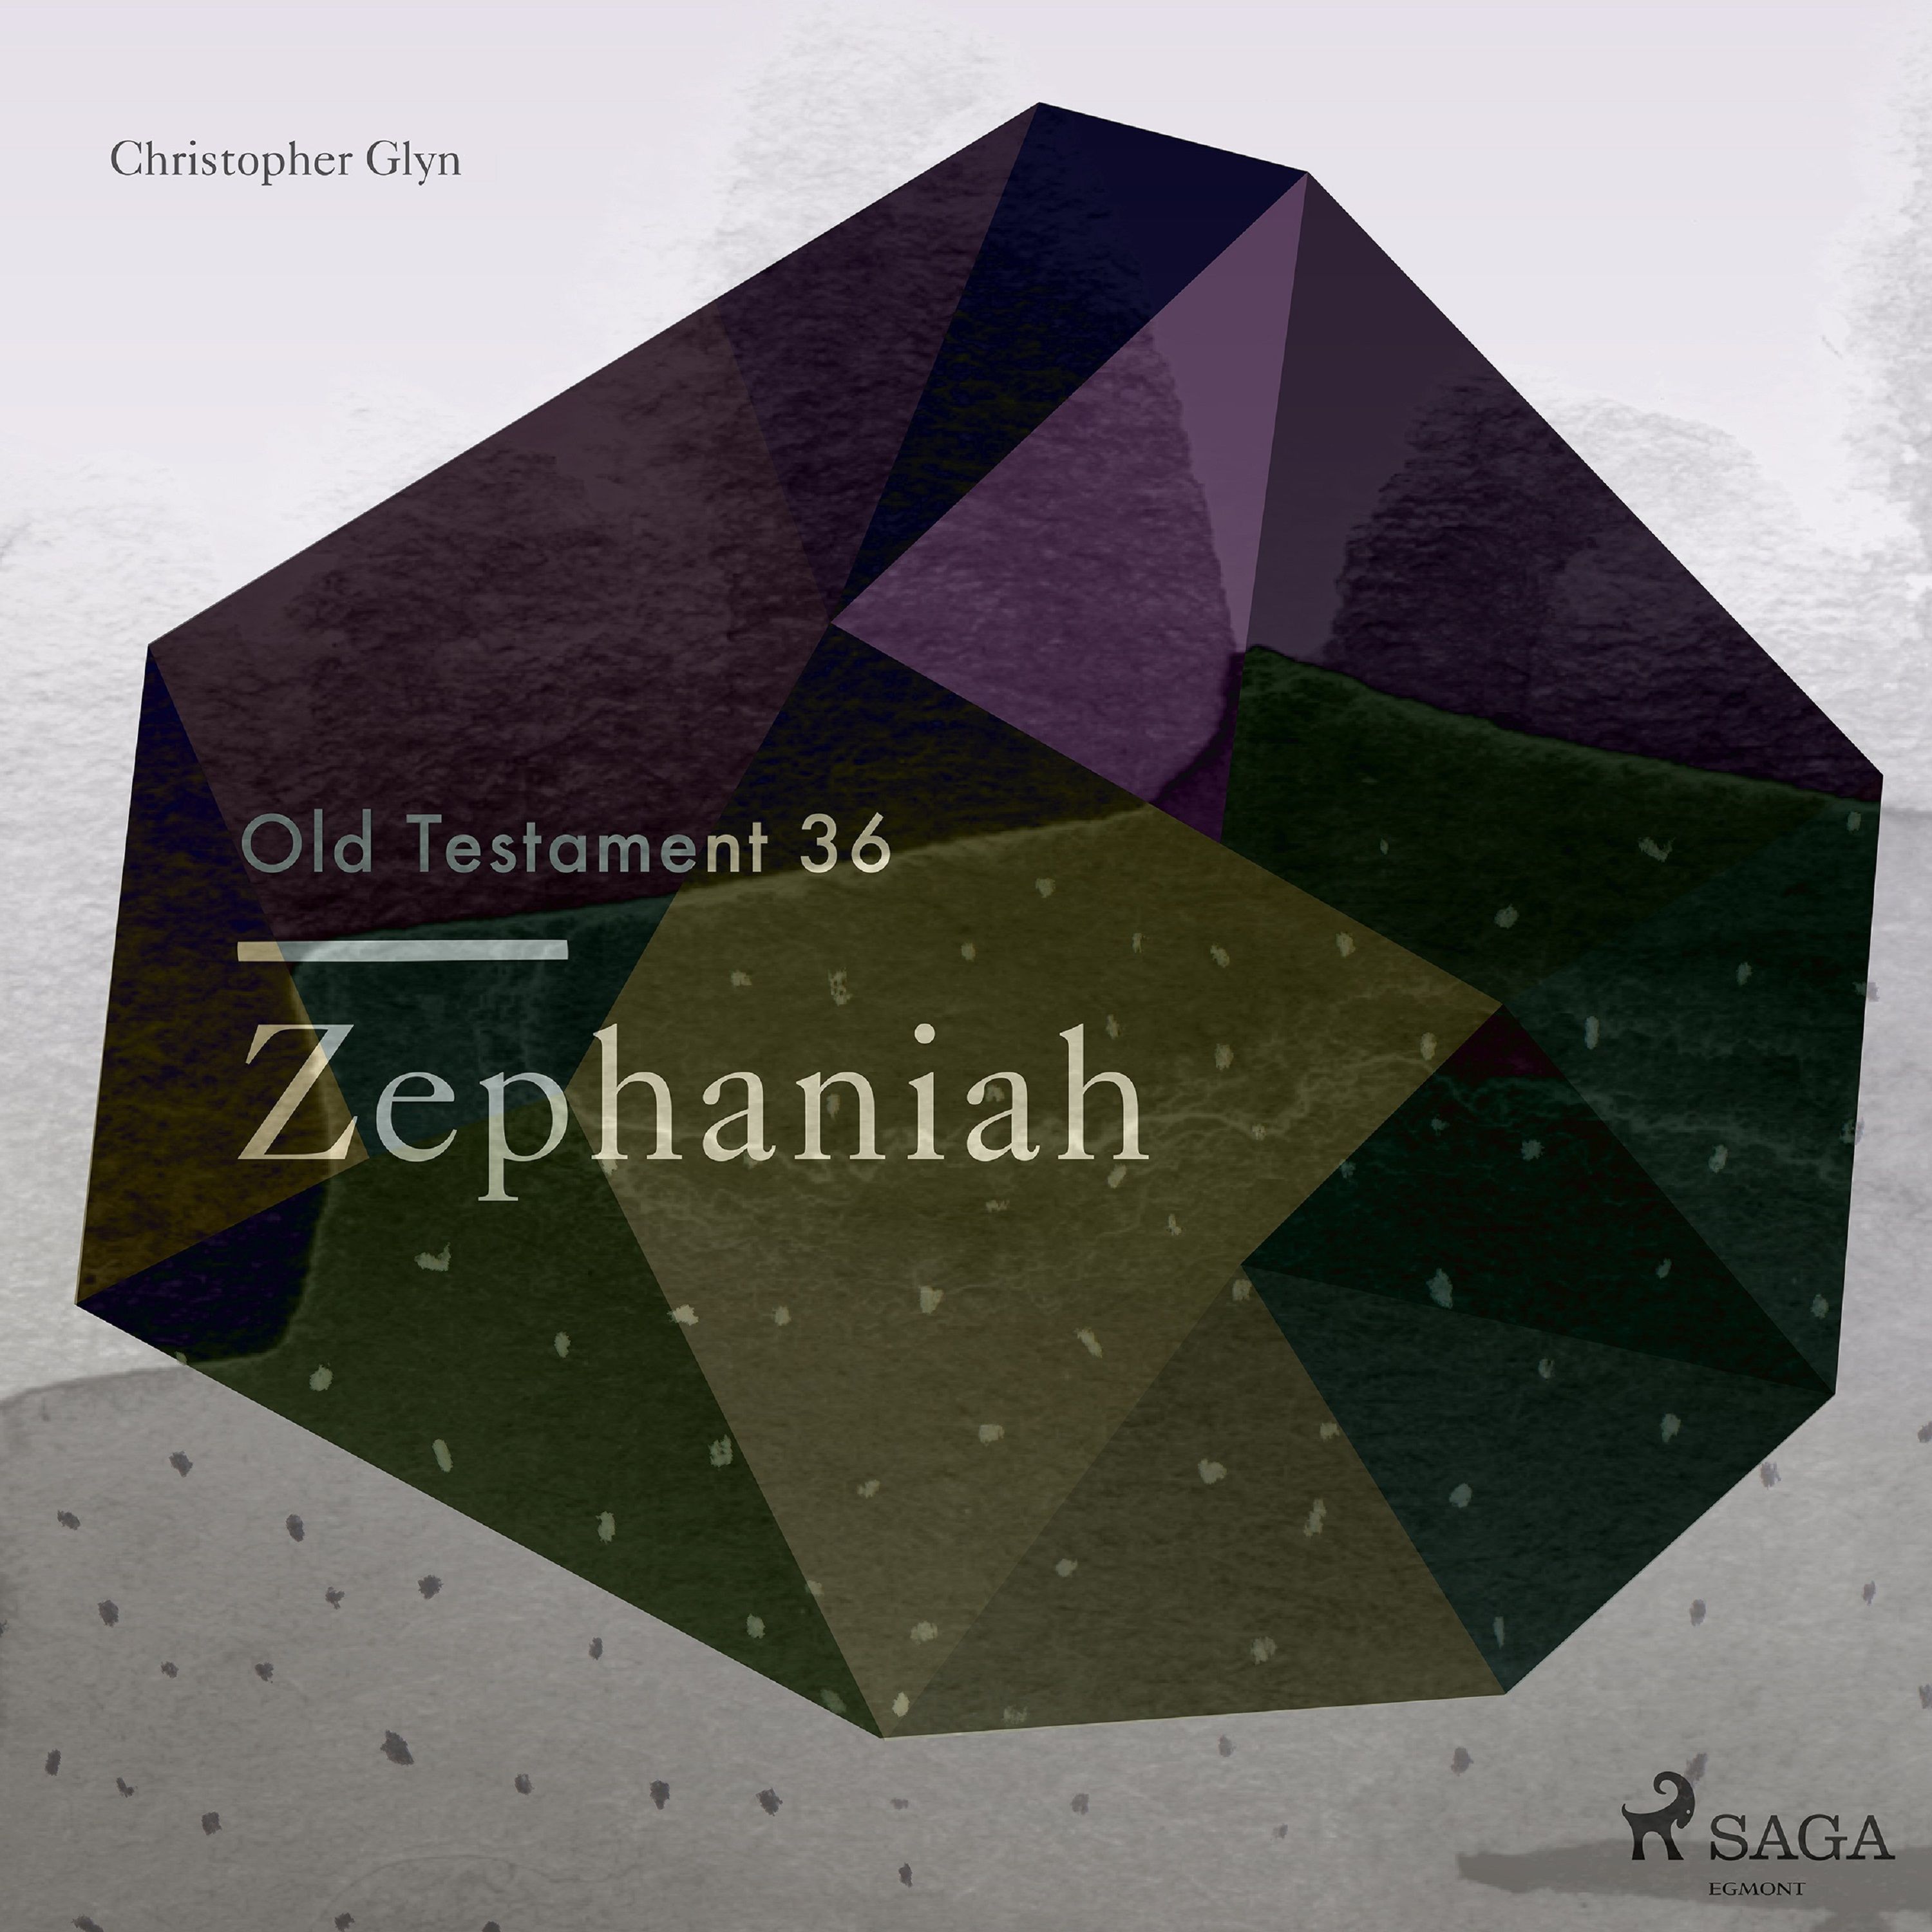 The Old Testament 36 - Zephaniah, audiobook by Christopher Glyn